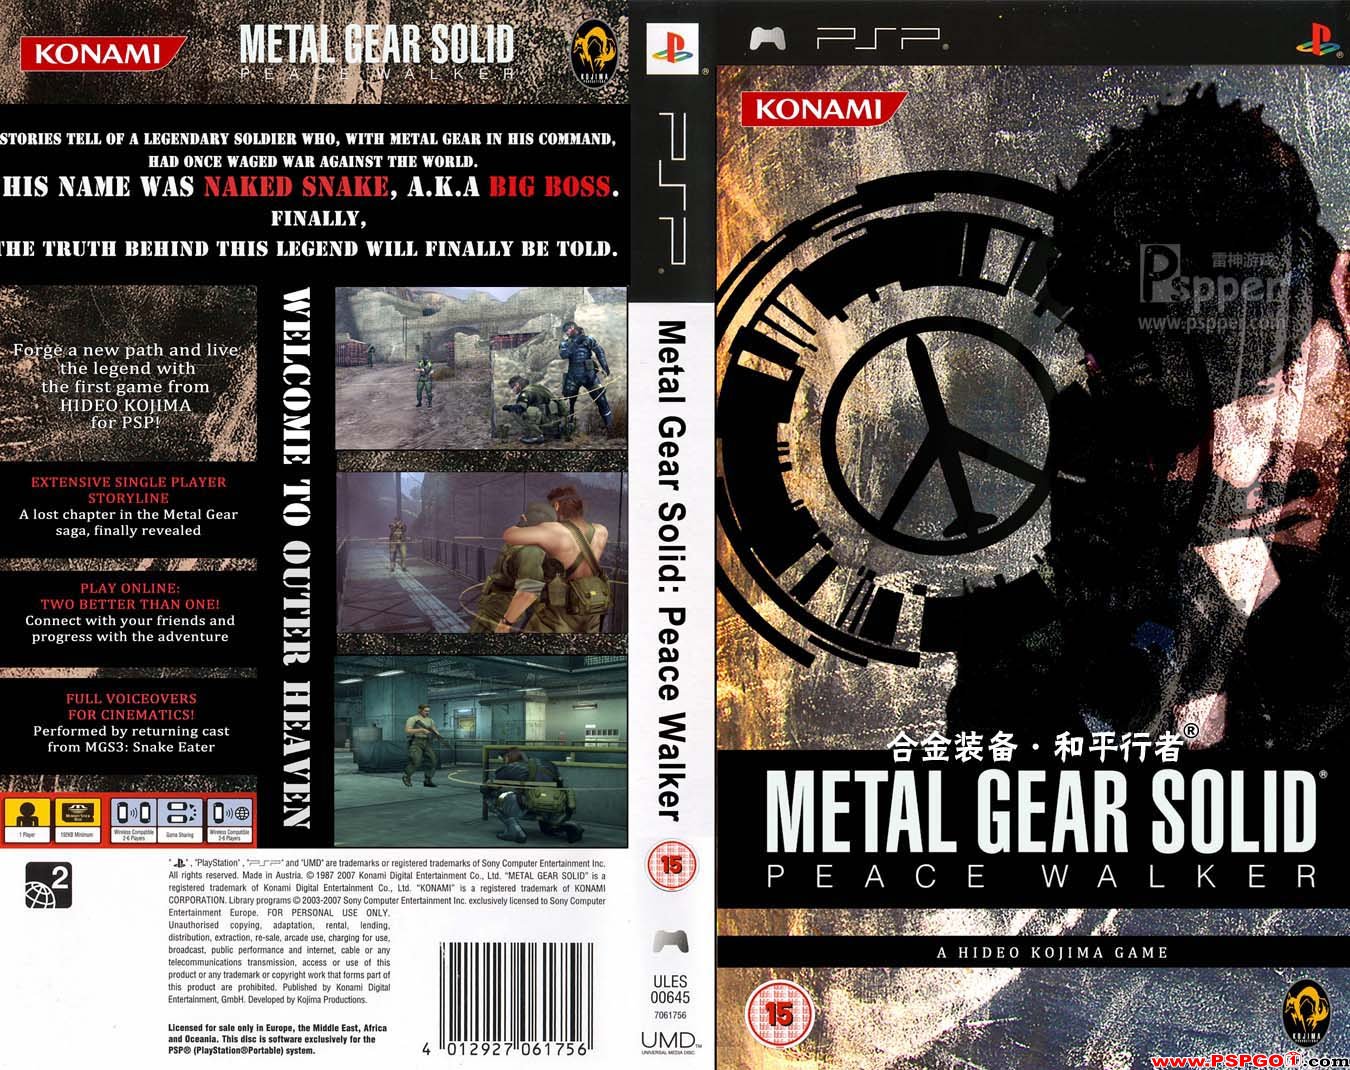 Amazing Metal Gear Solid: Peace Walker Pictures & Backgrounds